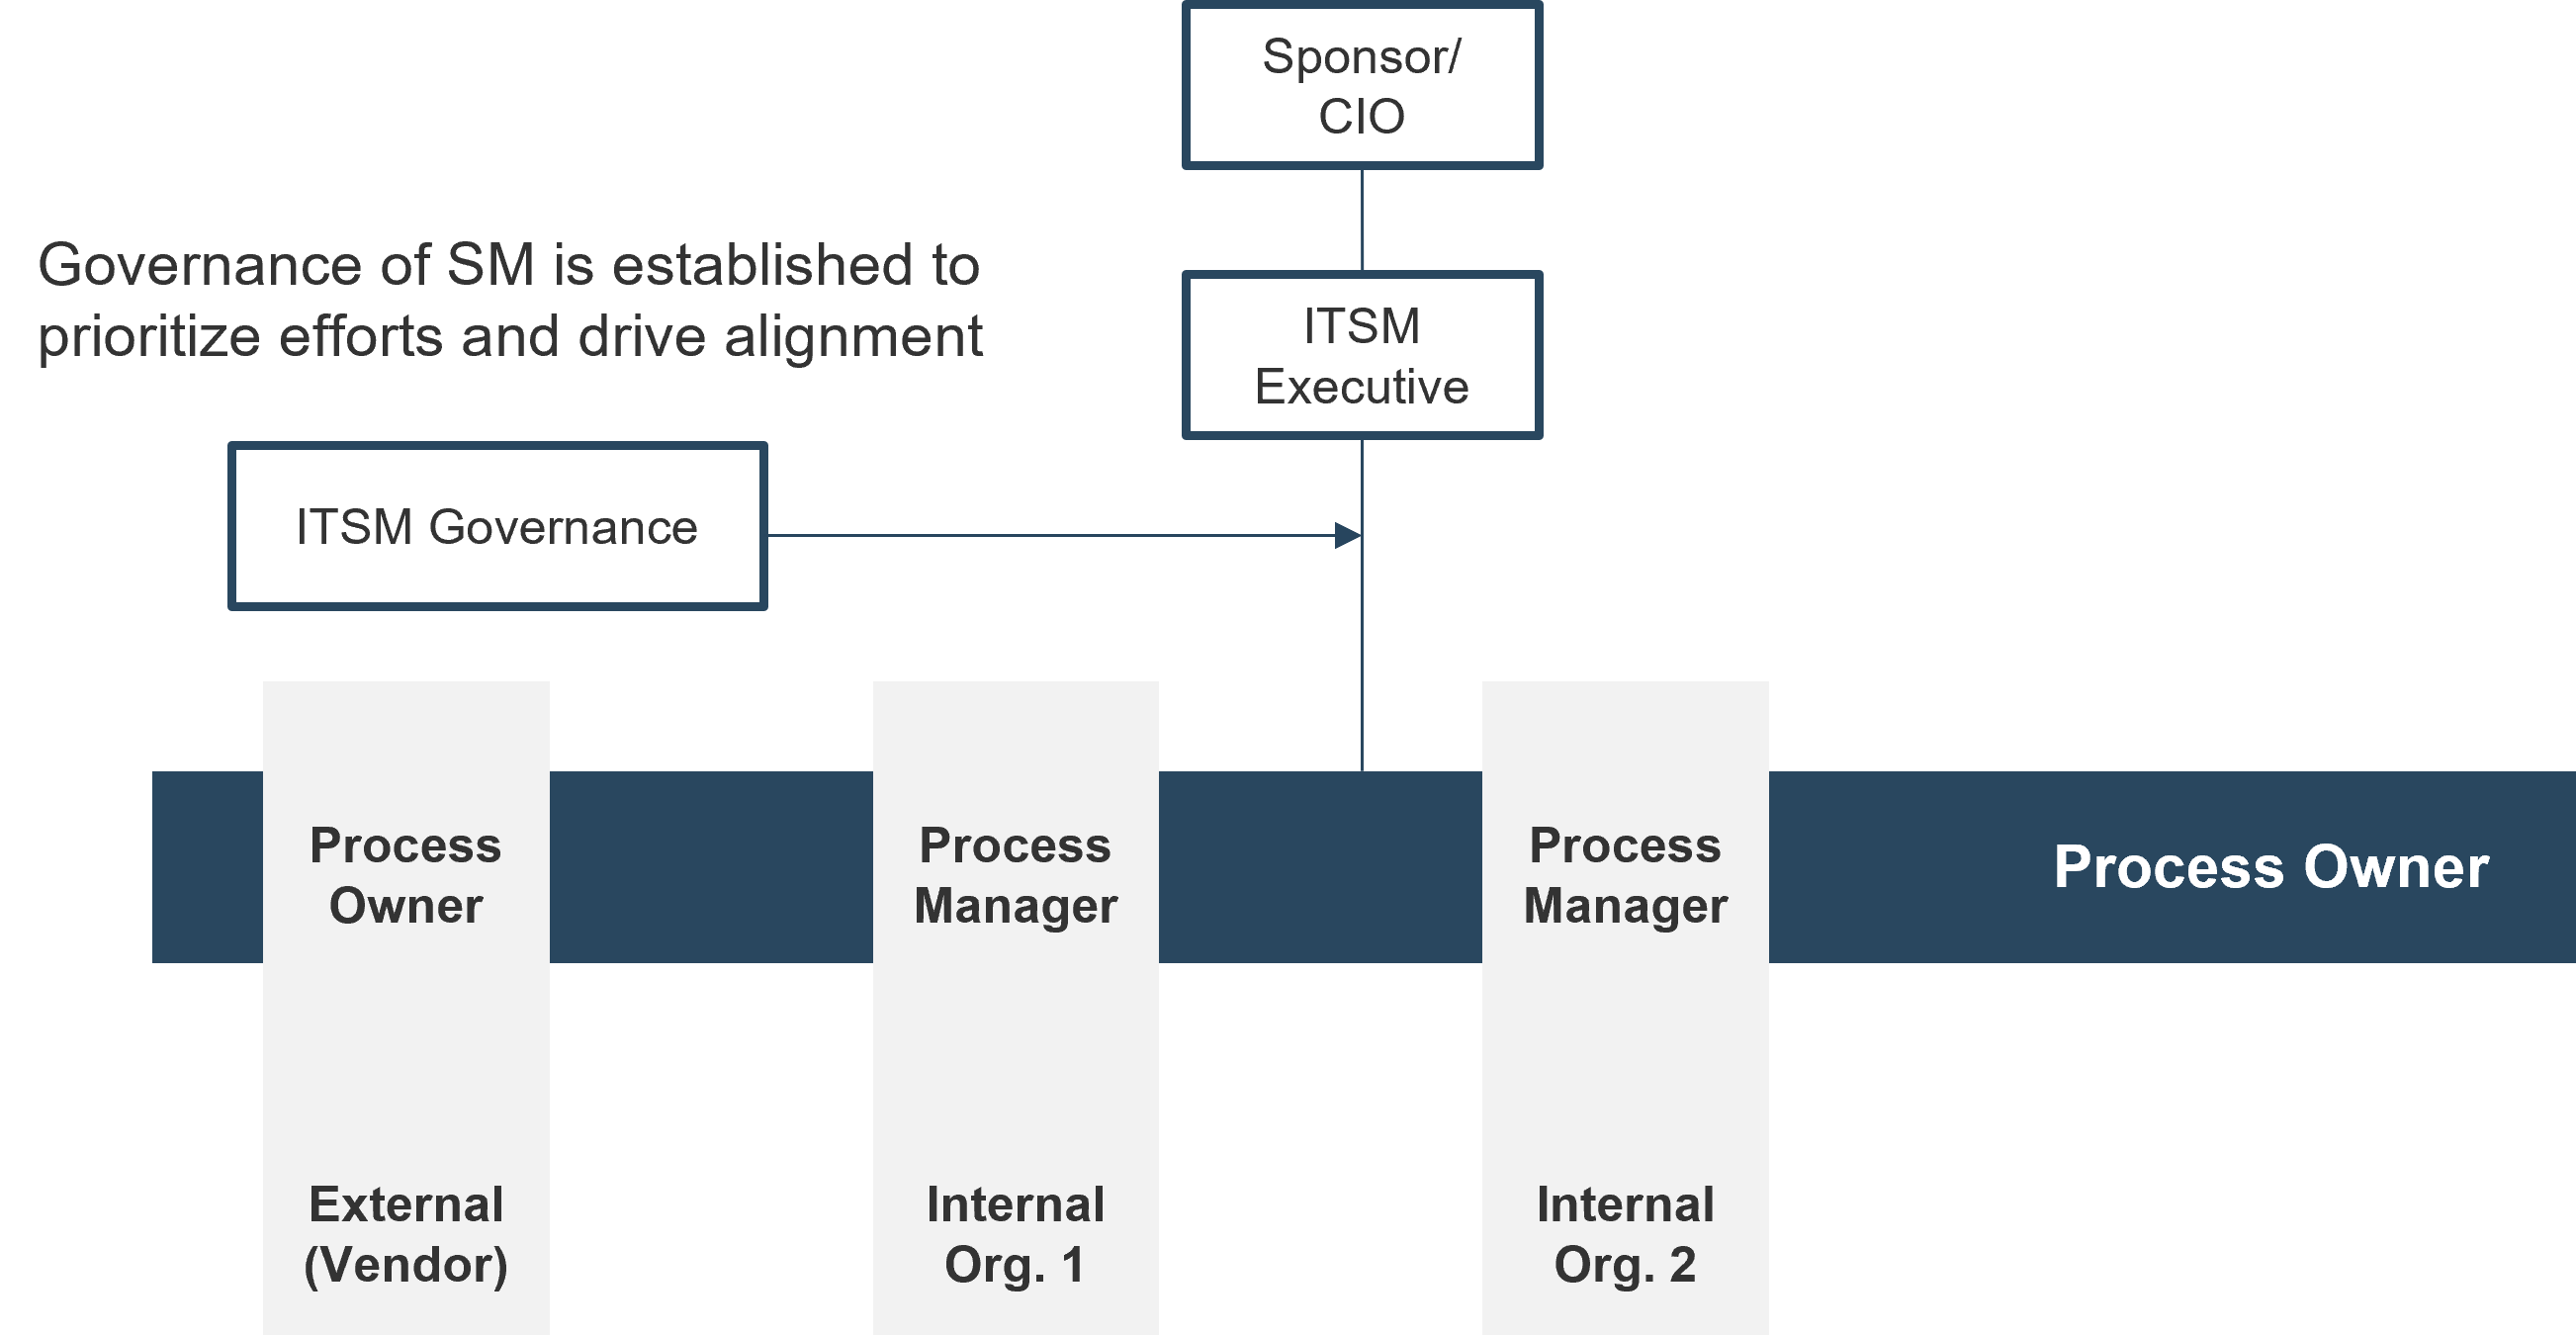 A federated process ownership model is shown. The Sponsor/CIO is at the top, with the ITSM Executive below it. Below that level is the: Process Owner, Process Manager, and Process Manager.